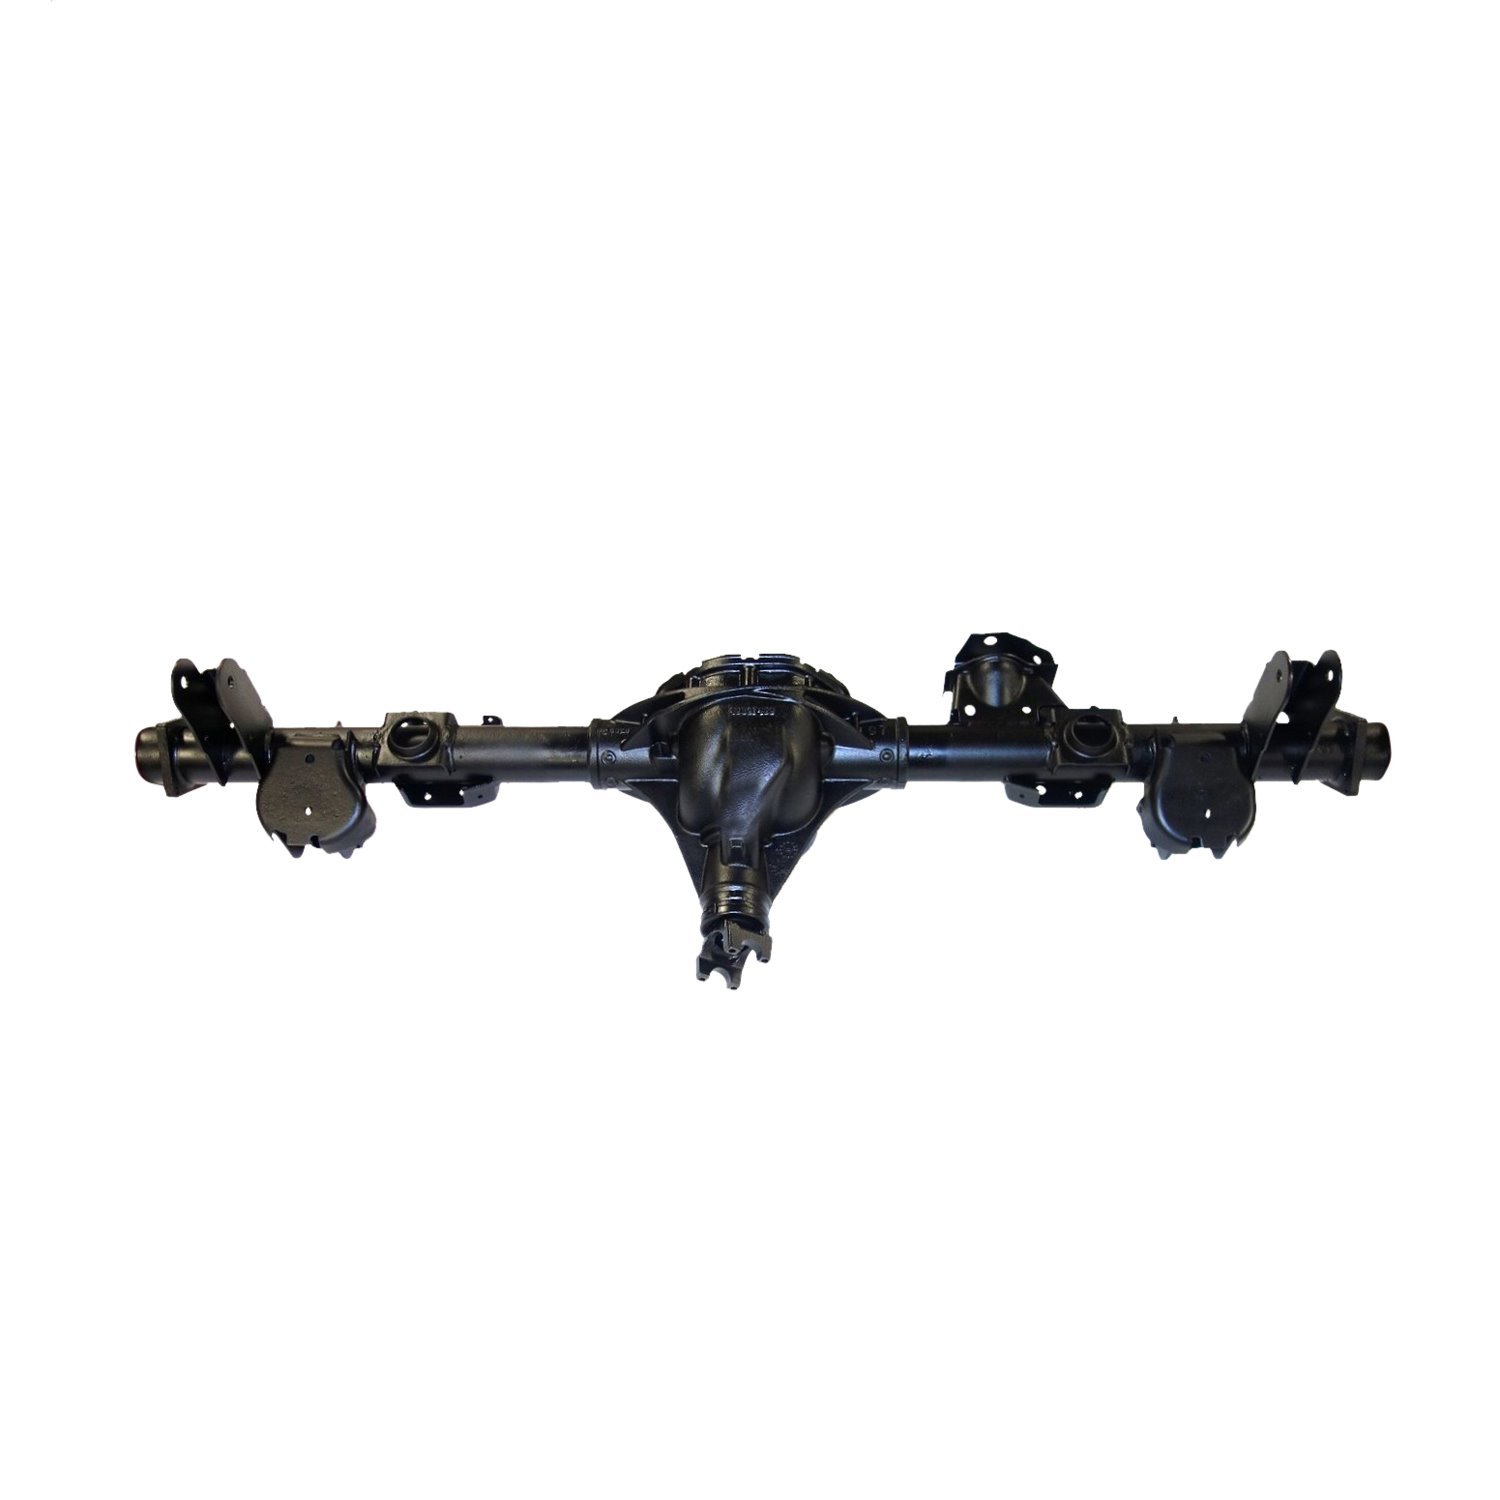 Remanufactured Axle Assembly for GM 8.6" 2007-08 GM Tahoe, Yukon, 3.08 Ratio, Open